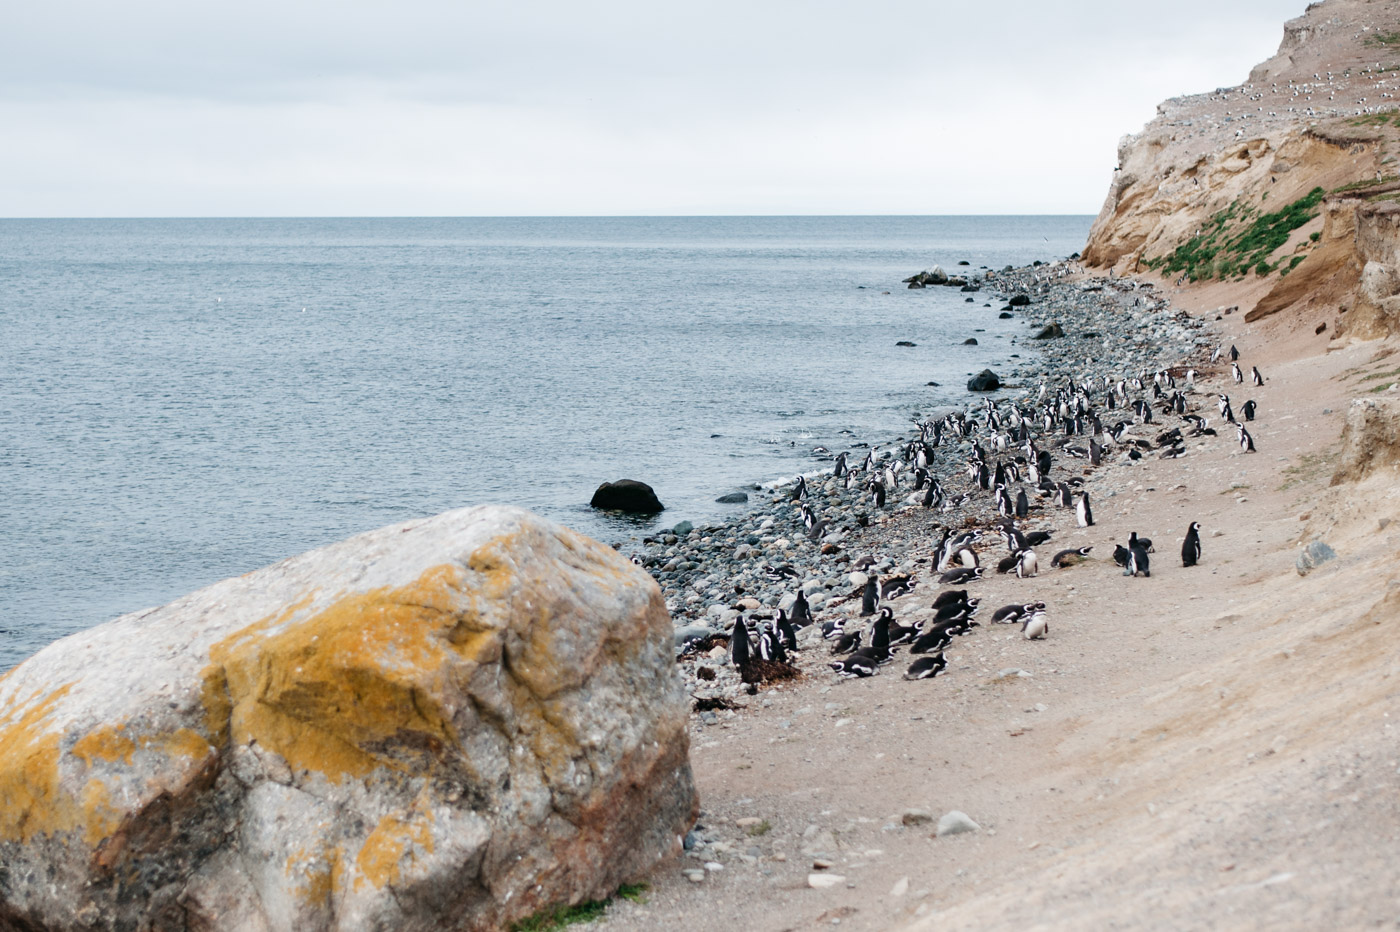 Coast of Isla Magdalena with hundreds of penguins on the shore